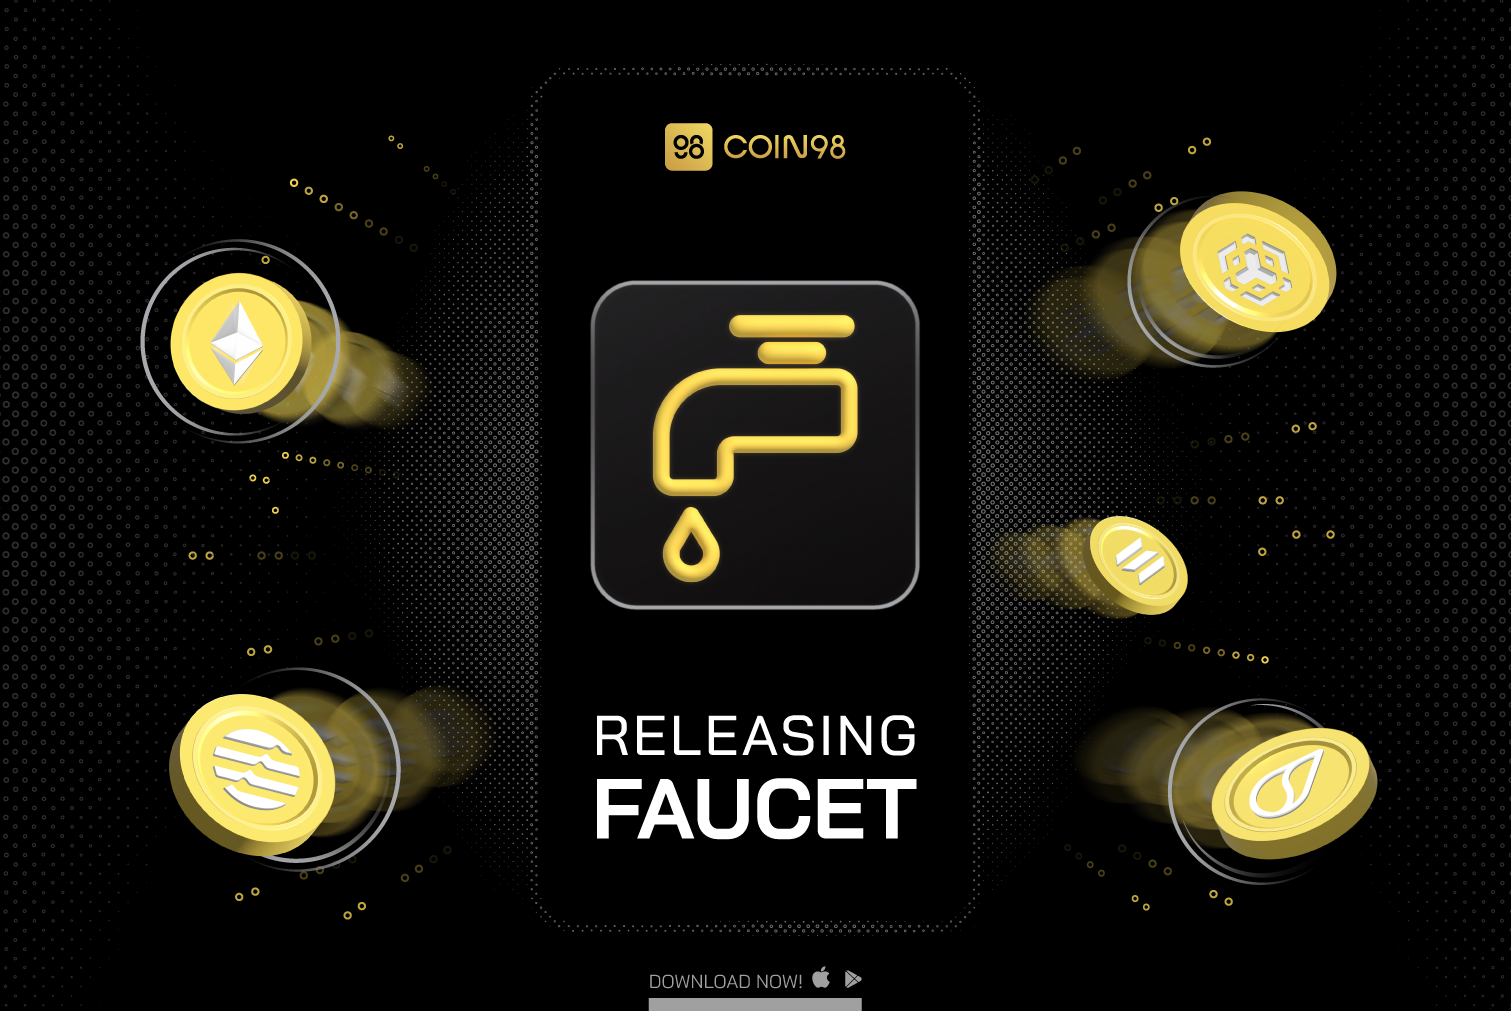 Coin98 releases the Faucet feature, allowing to claim testnet tokens on the app 